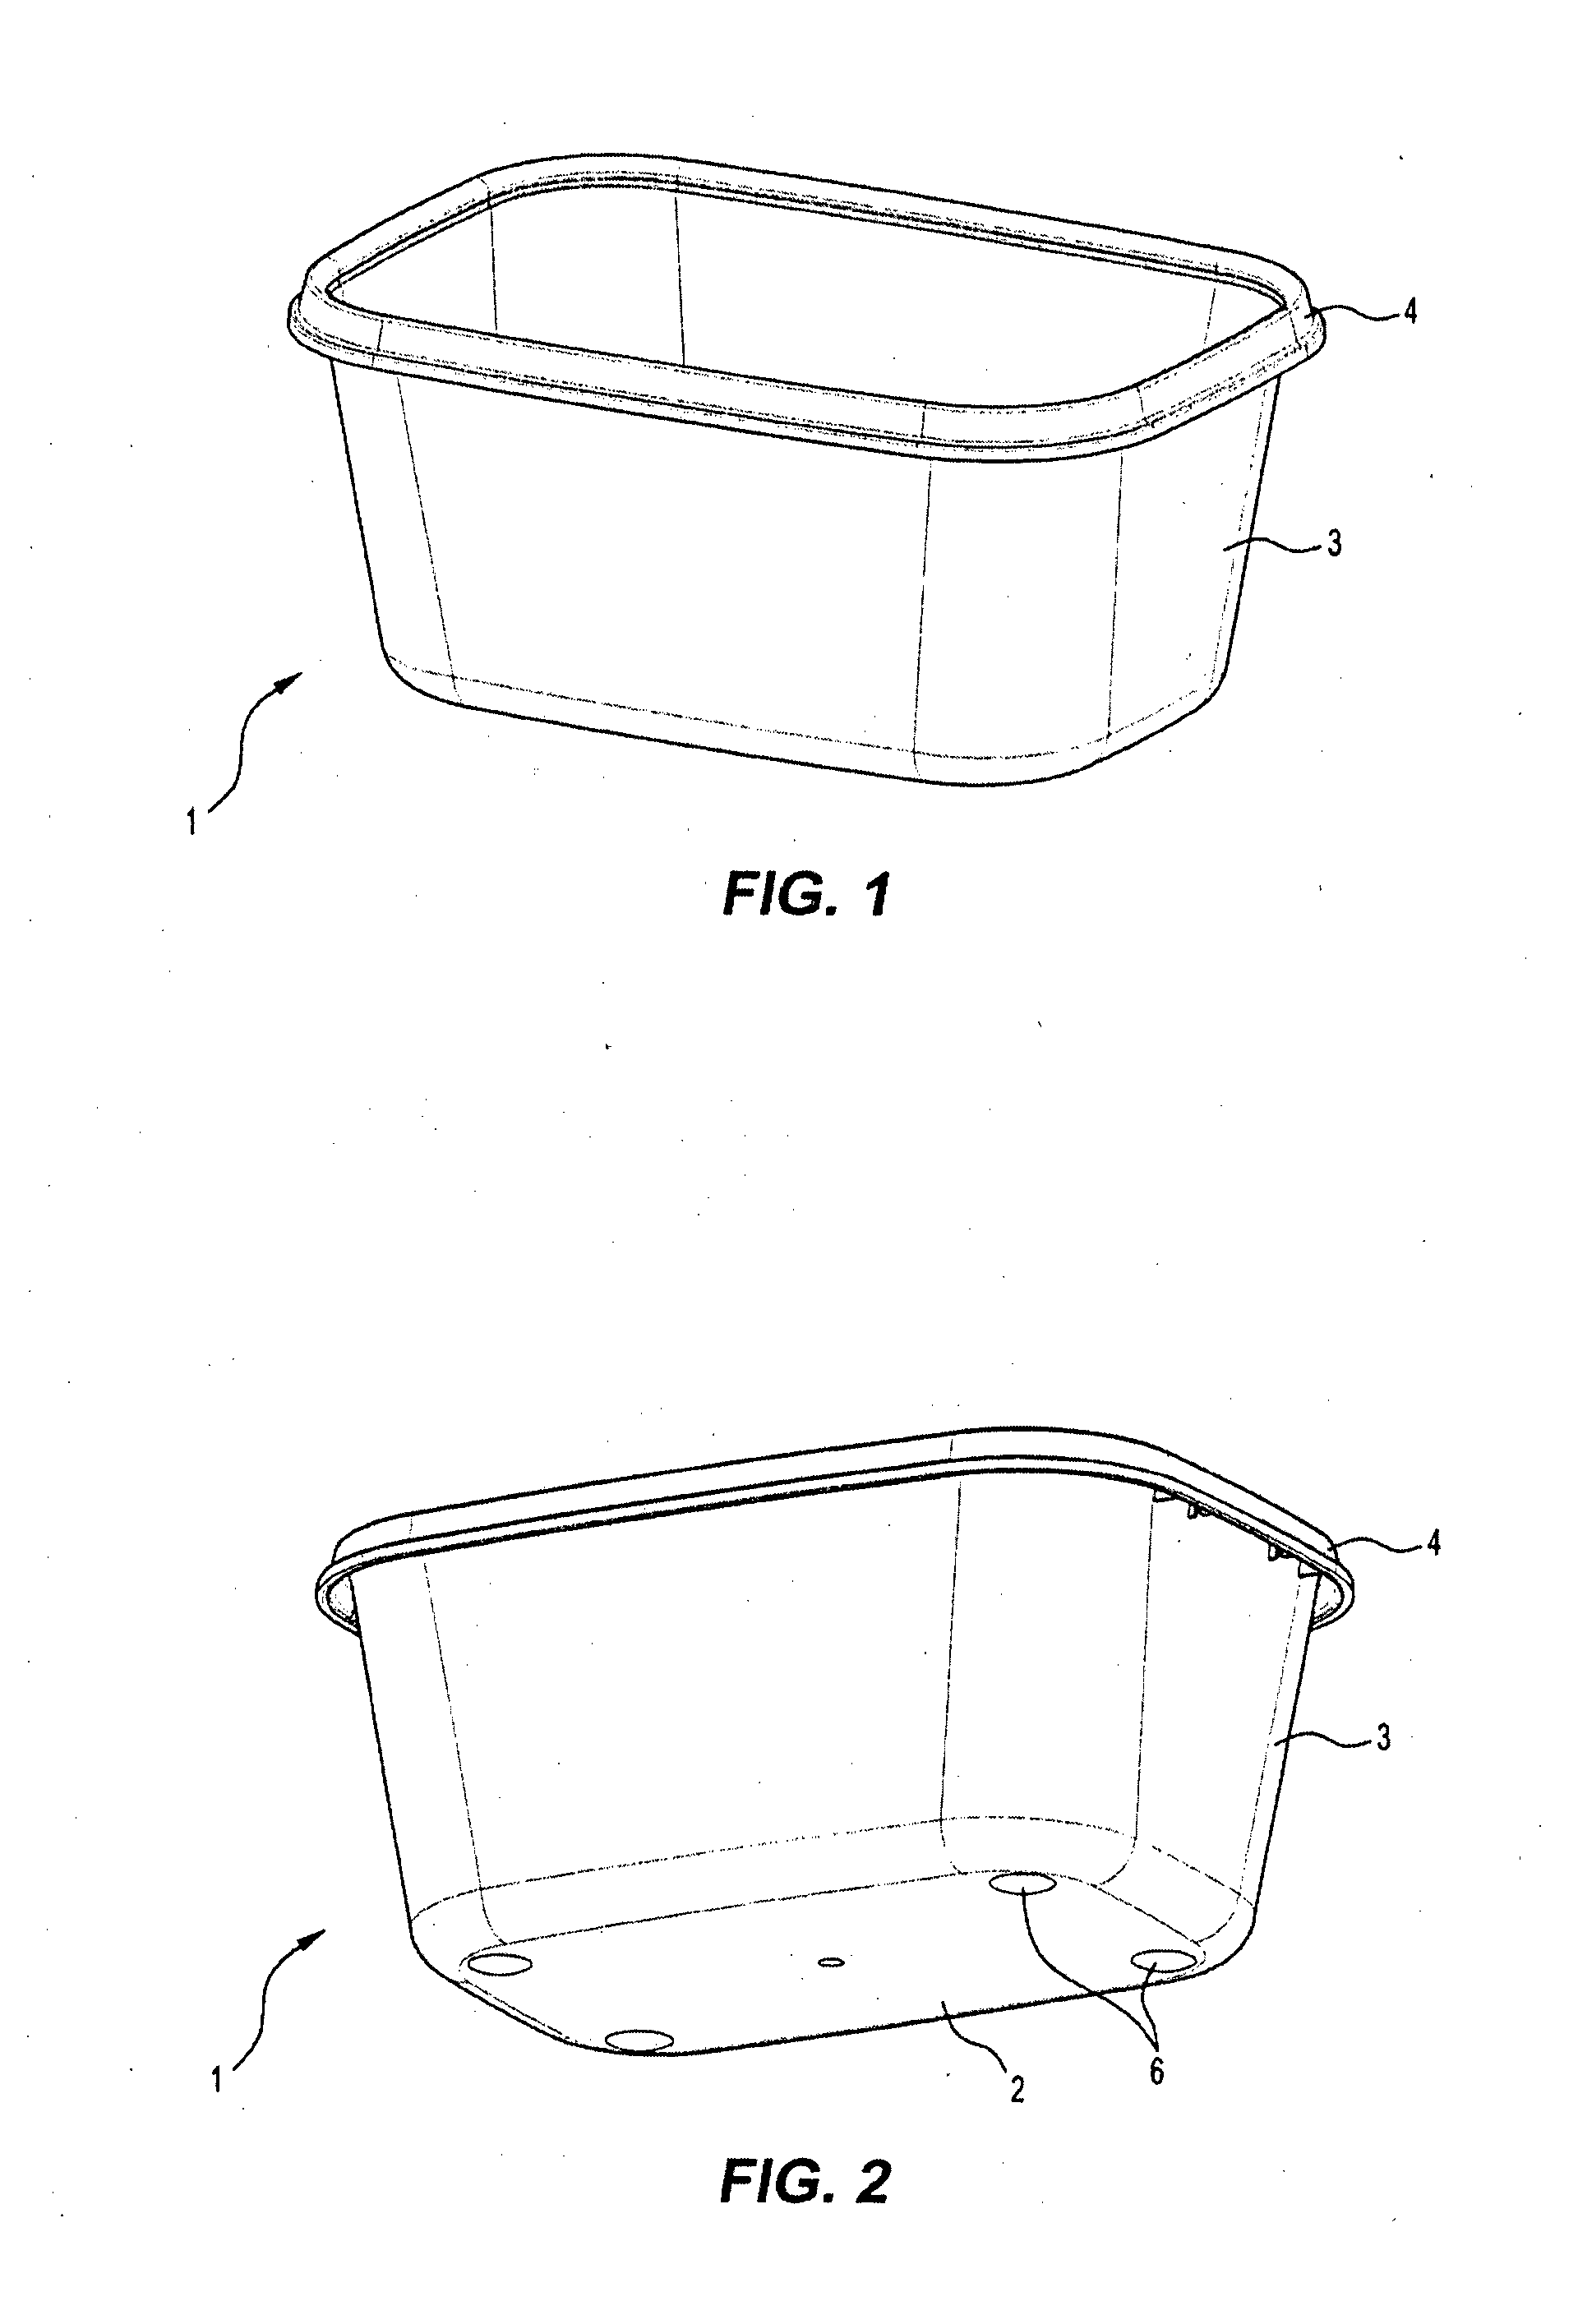 Sealable containers